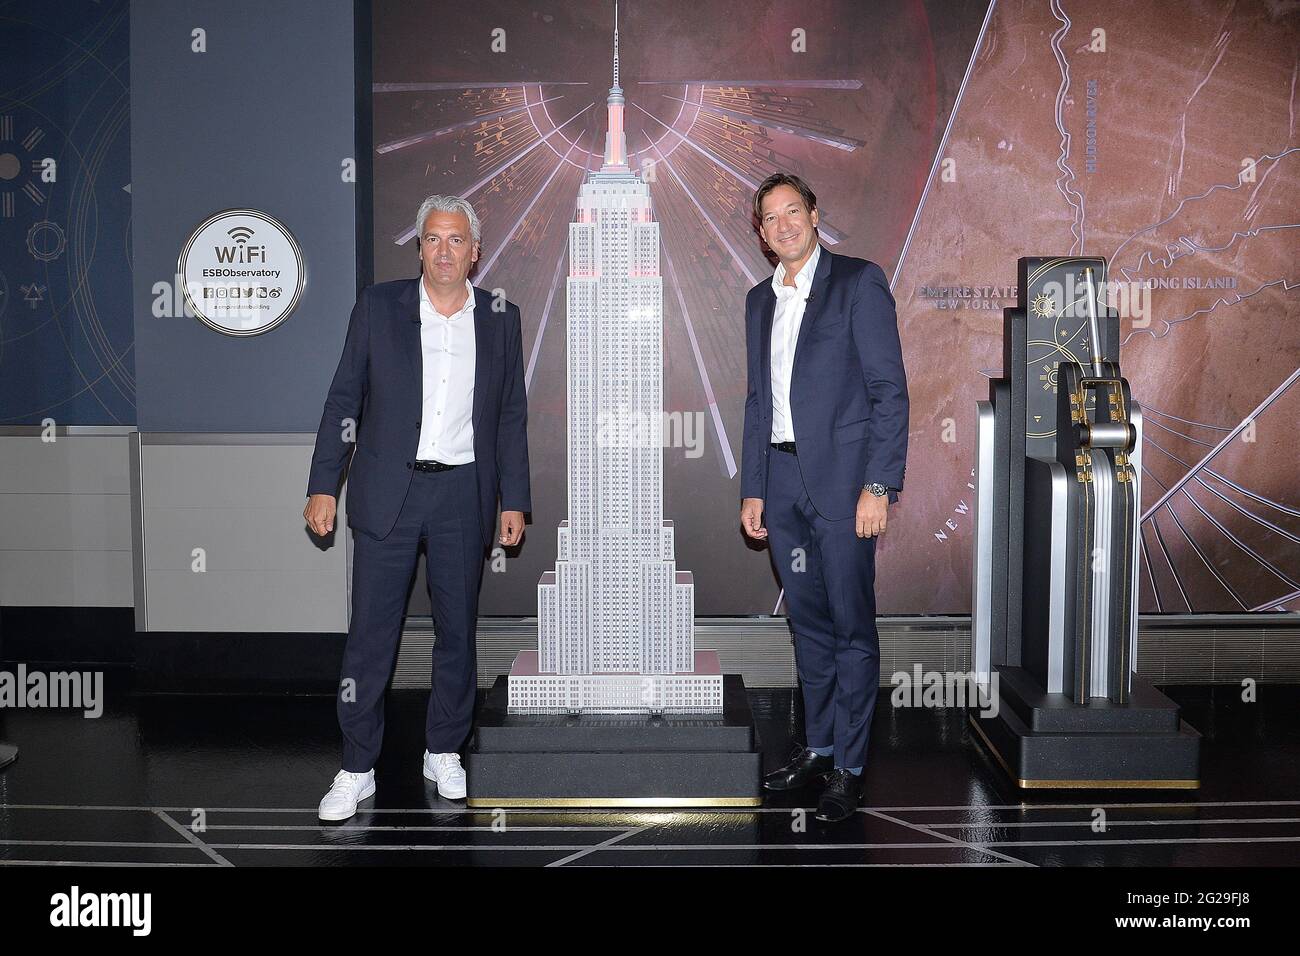 New York, USA. 09th June, 2021. (L-R) Joerg Wacker, FC Bayern Munich, Board Member for internationalization and strategy, and Rudolf Vidal, FC Bayern Munich, President - Americas, from FC Bayern Munich, German professional soccer sports club, visit the Empire State Building for a special lighting ceremony in New York, NY, June 9, 2021. (Photo by Anthony Behar/Sipa USA) Credit: Sipa USA/Alamy Live News Stock Photo